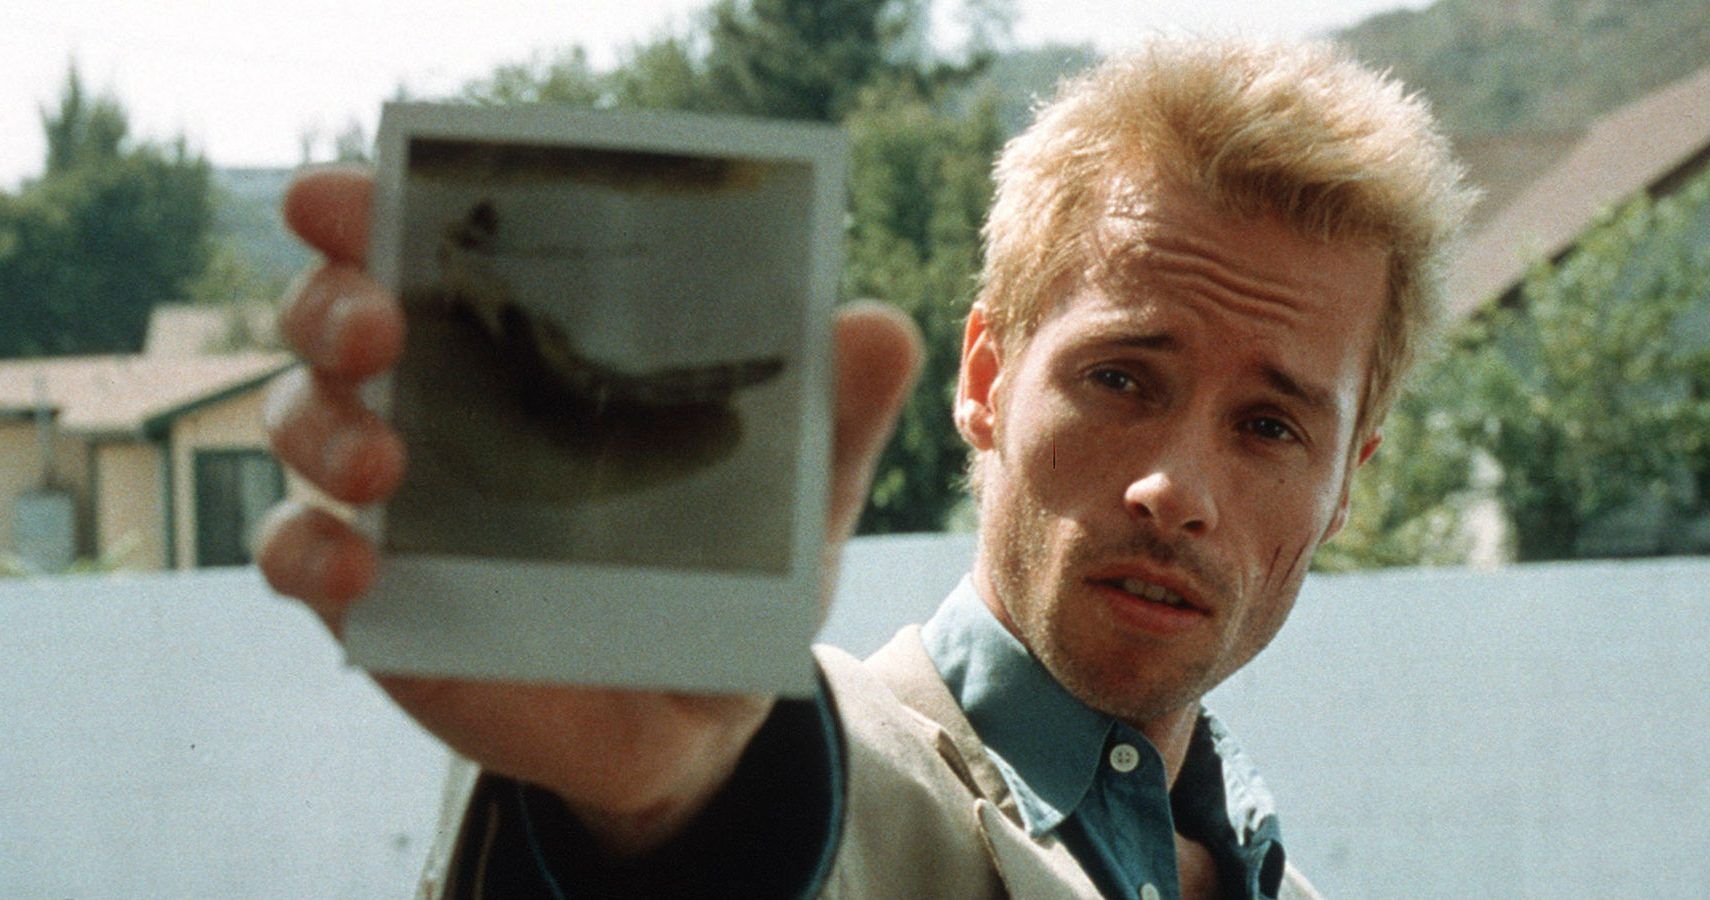 Guy Pearce in Memento by Christopher Nolan